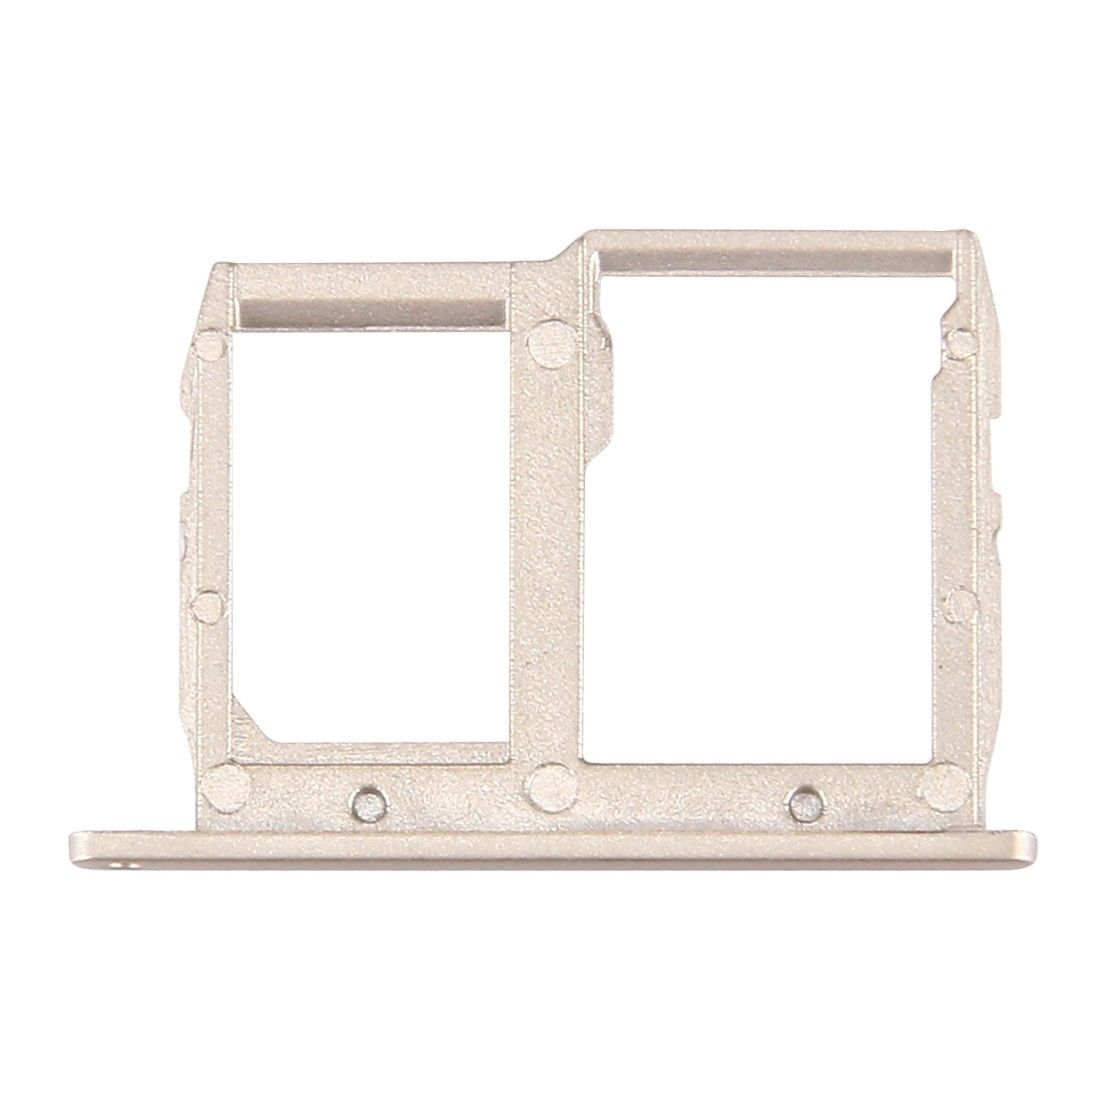 LG G5 Replacement MicroSD & Nano SIM Card Tray Holder - Gold for [product_price] - First Help Tech